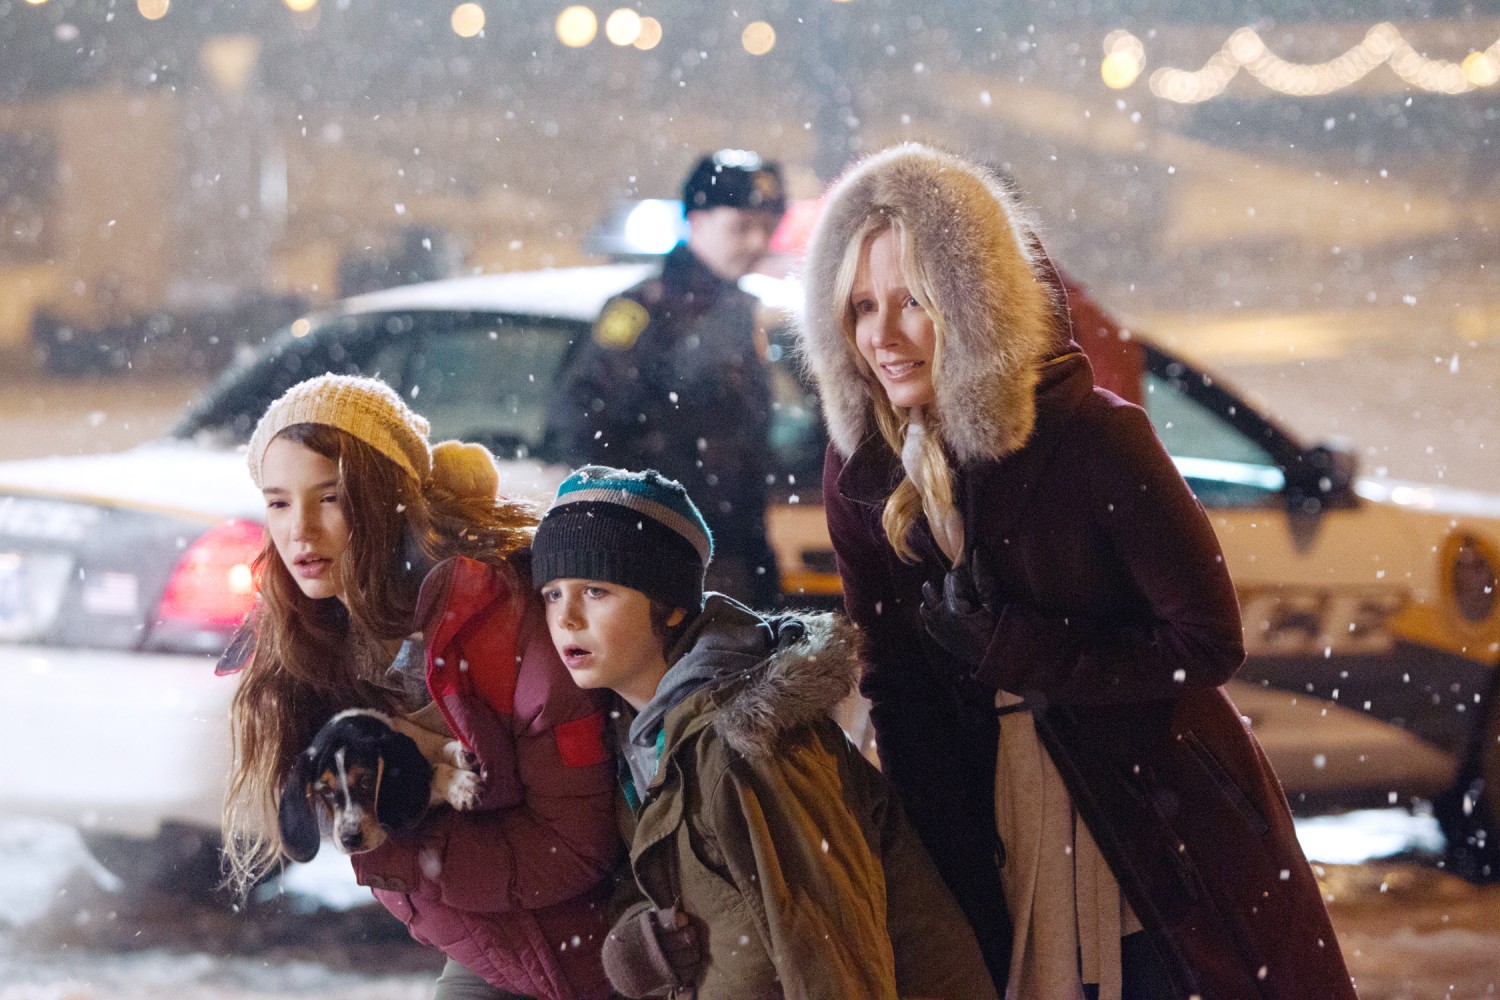 Griffin Kane with Anne Heche and Alissa Skovbye on the set of One Christmas Eve, 2014.